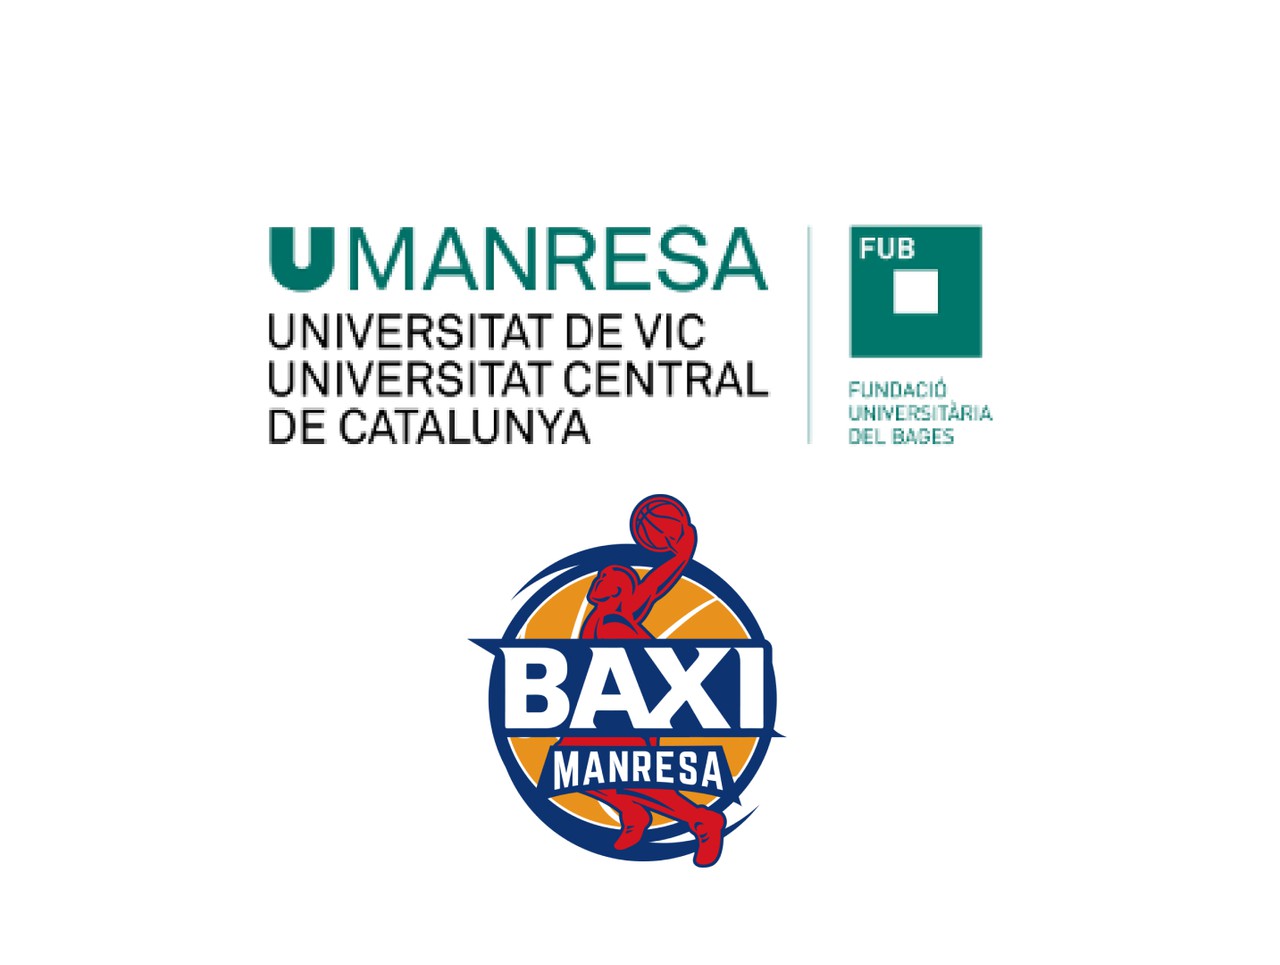 Bàsquet Manresa and UVIC-UCC launch an industrial doctorate call